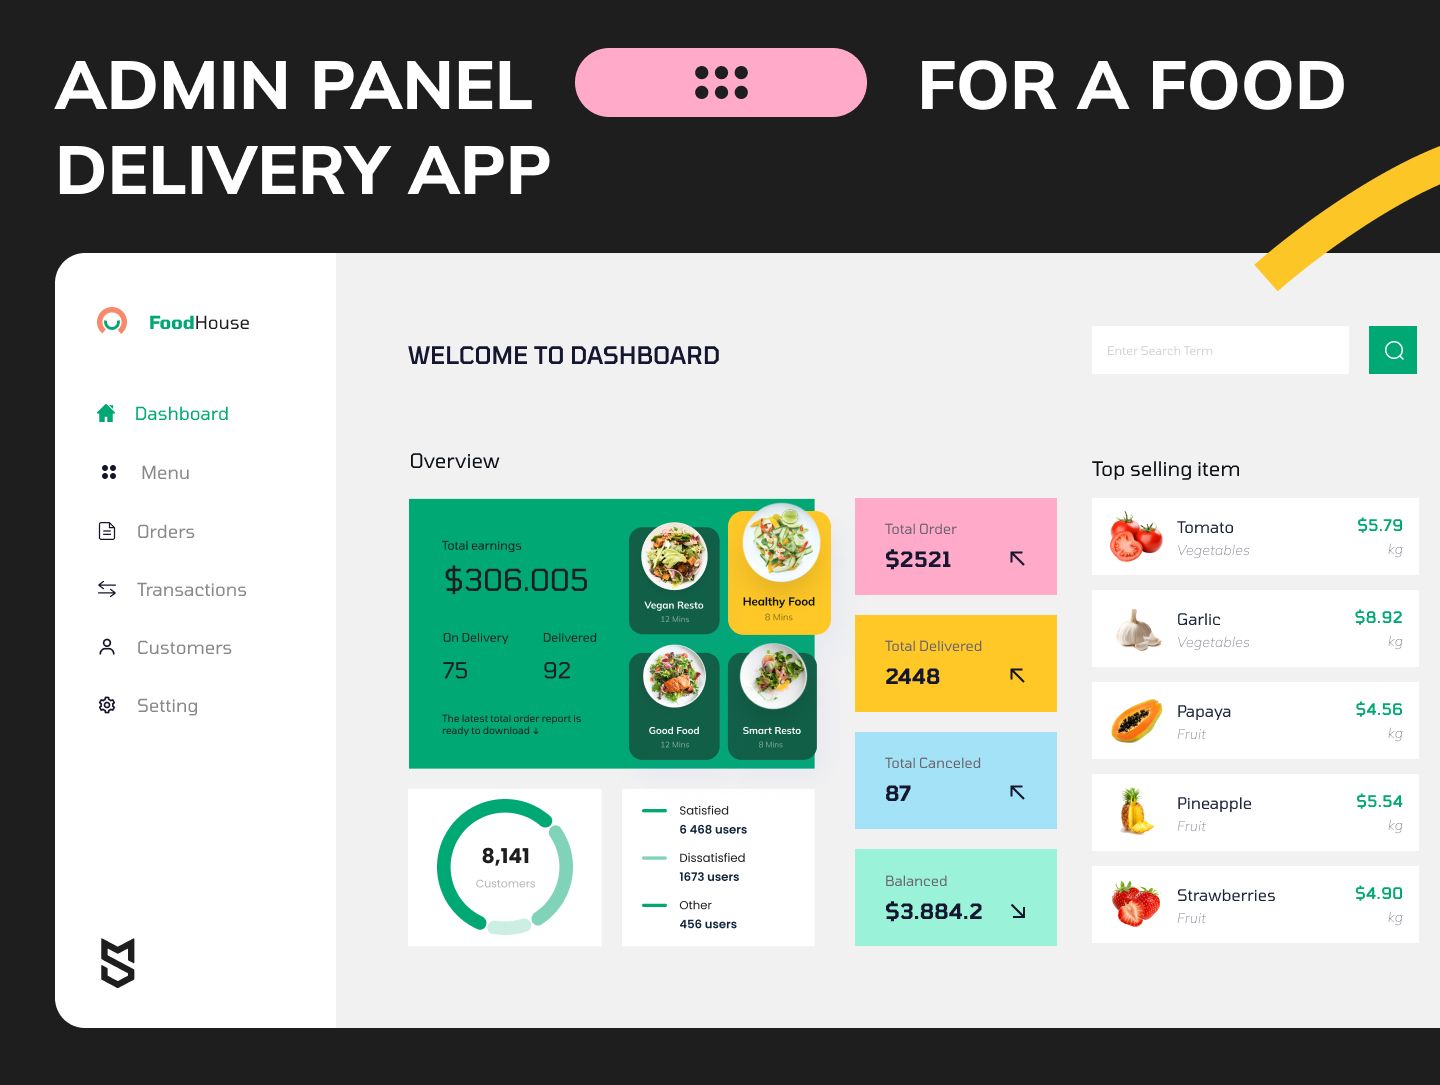 Admin panel for a food delivery app